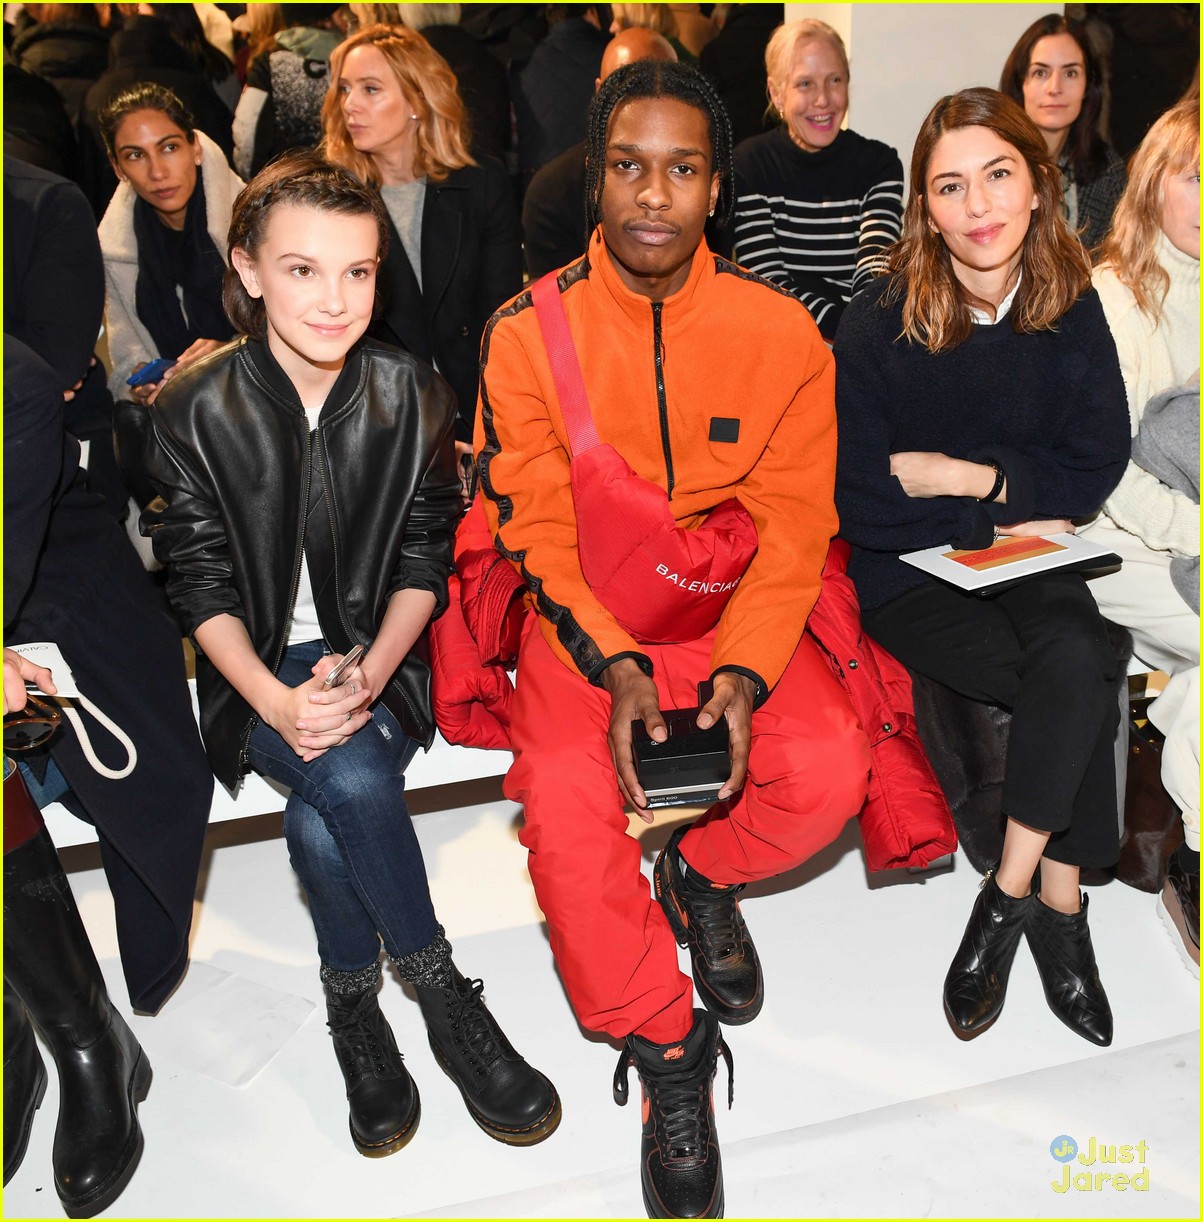 Millie Bobby Brown Sits Front Row at Calvin Klein Collection Show in NYC!:  Photo 1068230, 2017 New York Fashion Week Winter, Millie Bobby Brown  Pictures